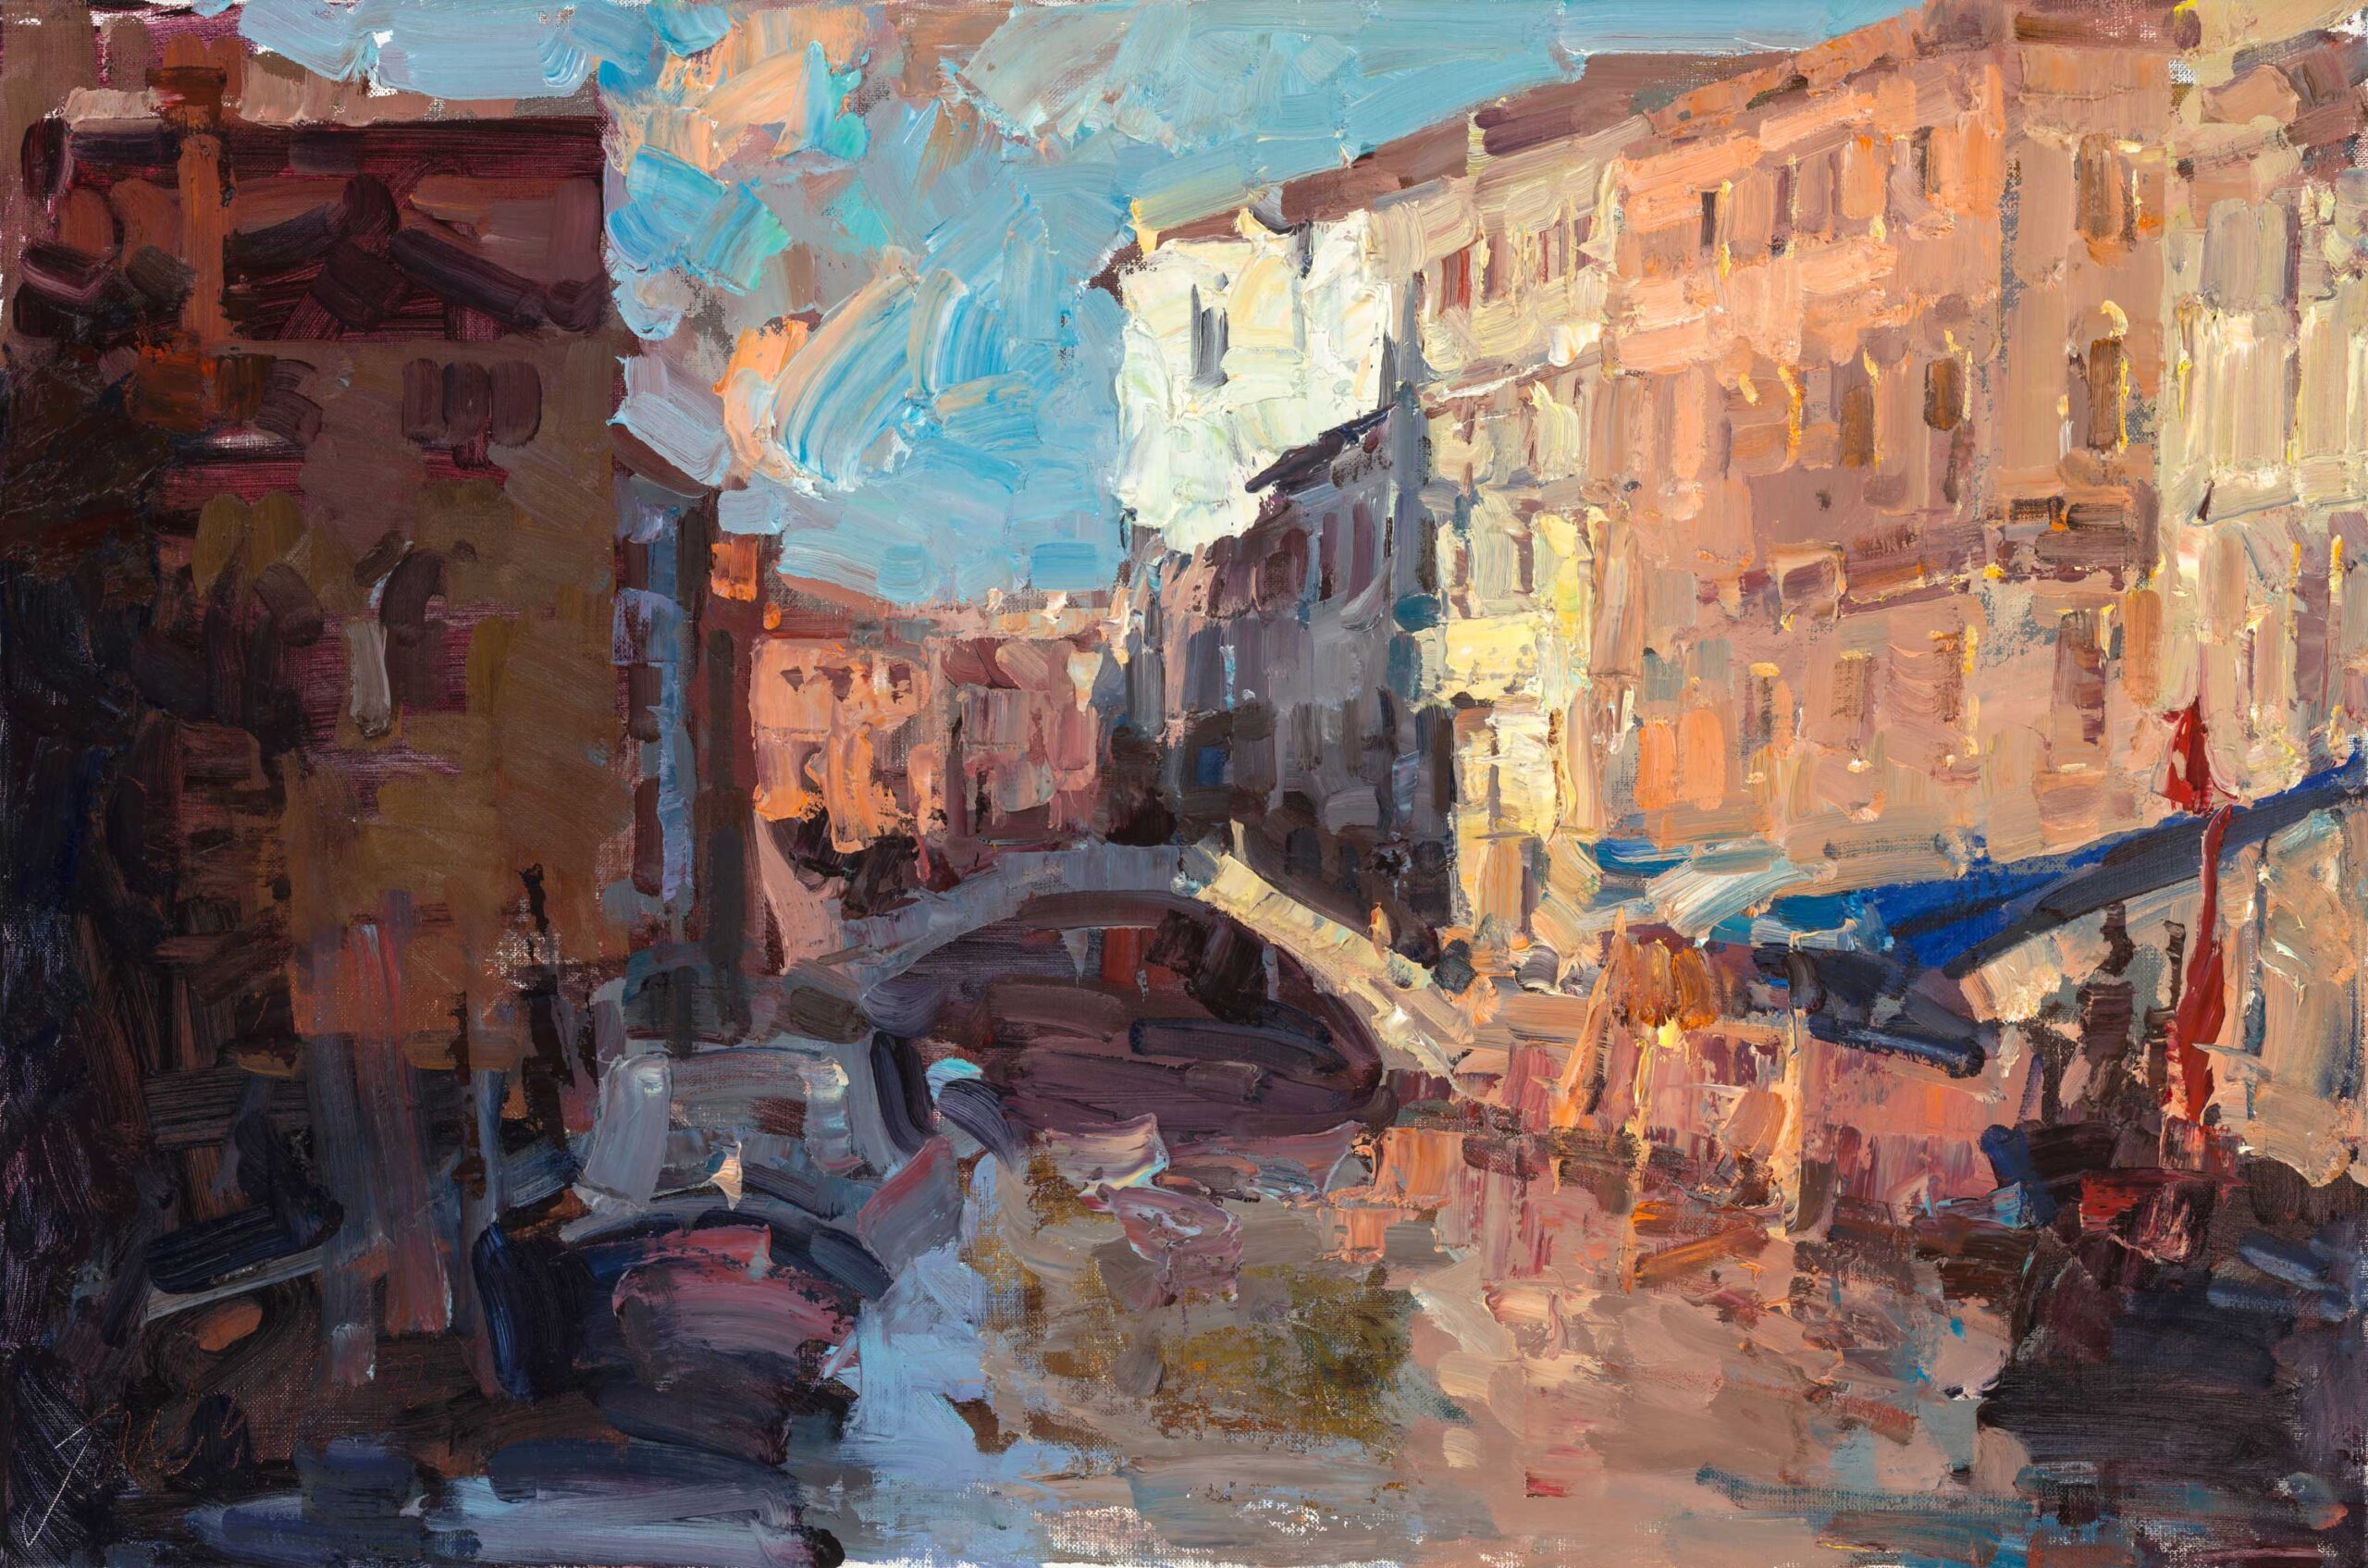 A Venice scene painted by Jove Wang for his painting workshop, "Expressive Cityscapes"